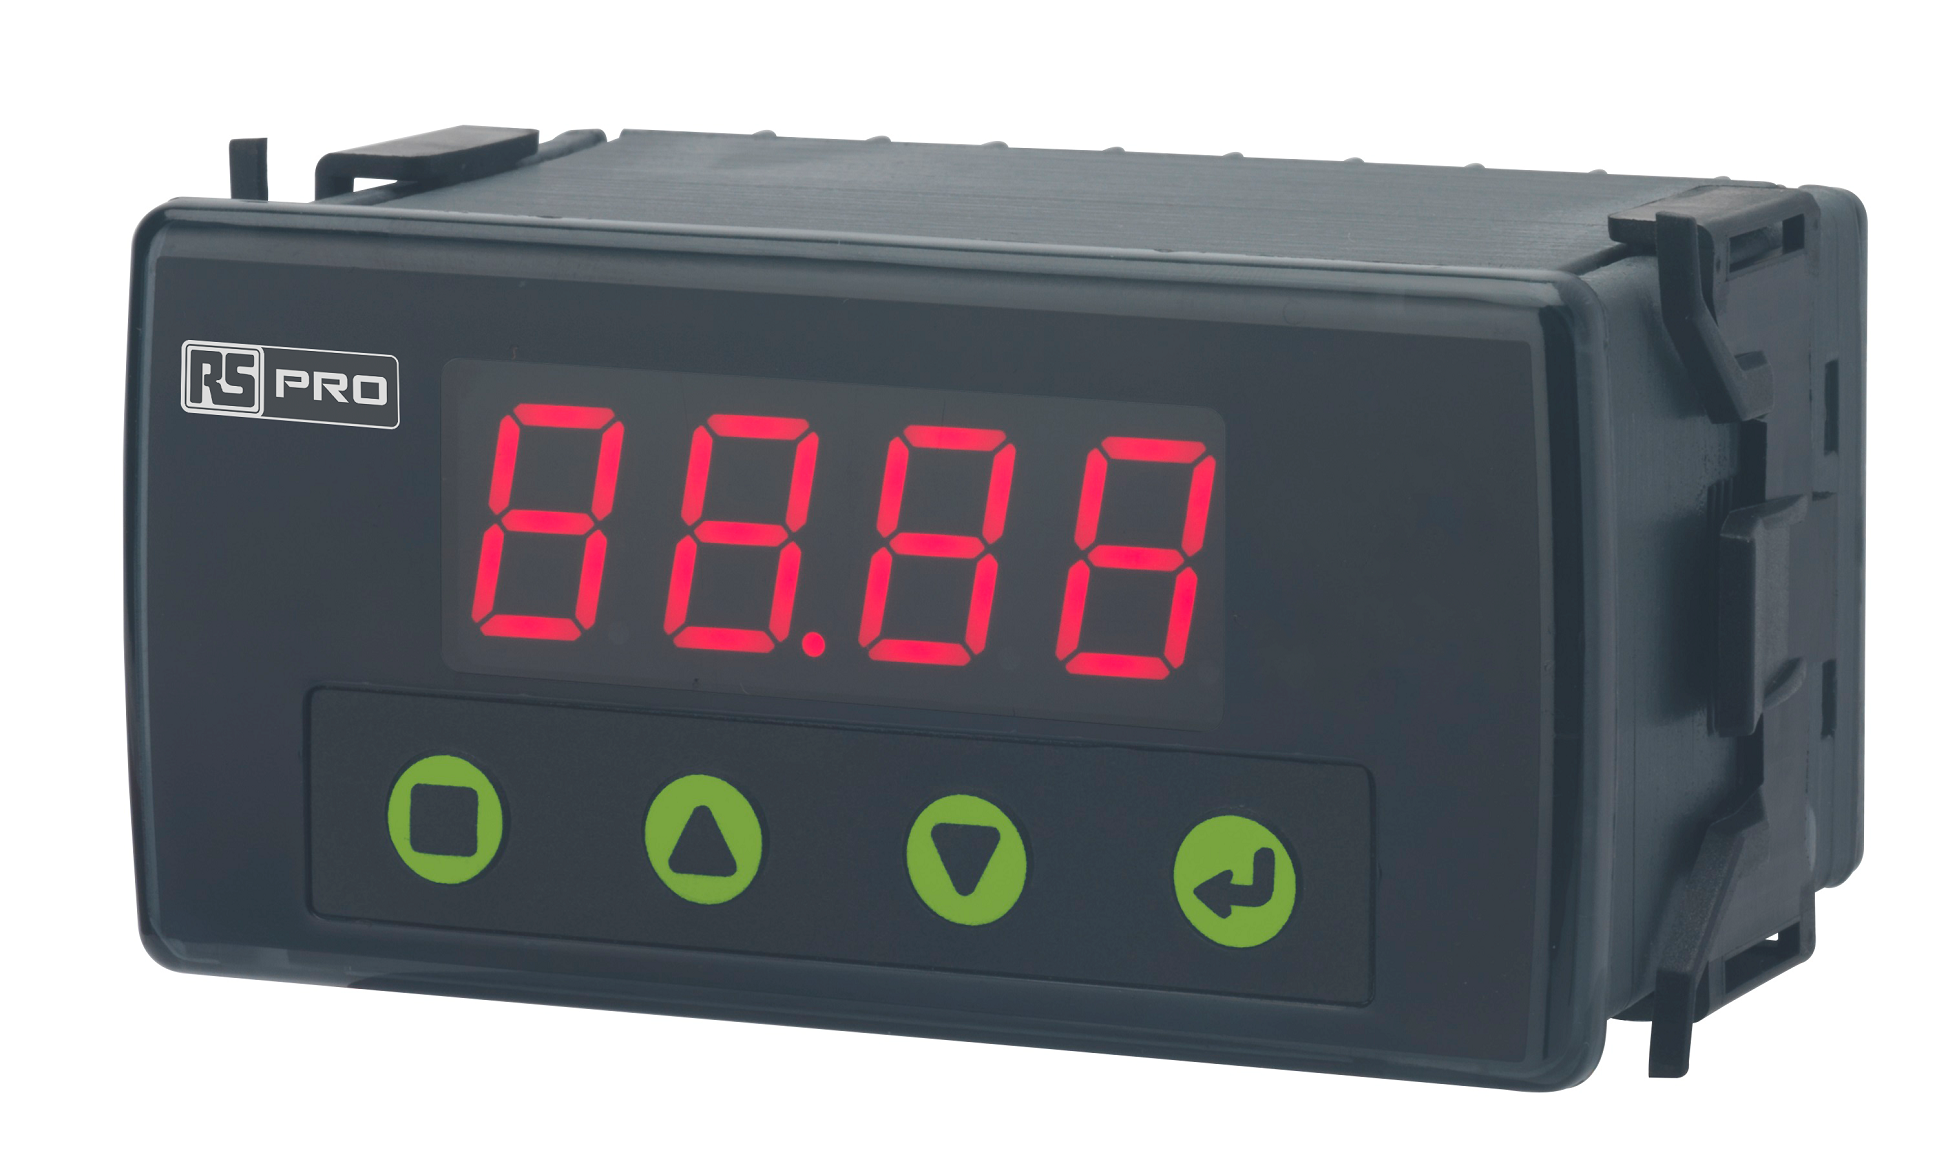 RS PRO 7-Segment Display Process Indicator for RTD & Thermocouple Inputs, 92mm x 45mm